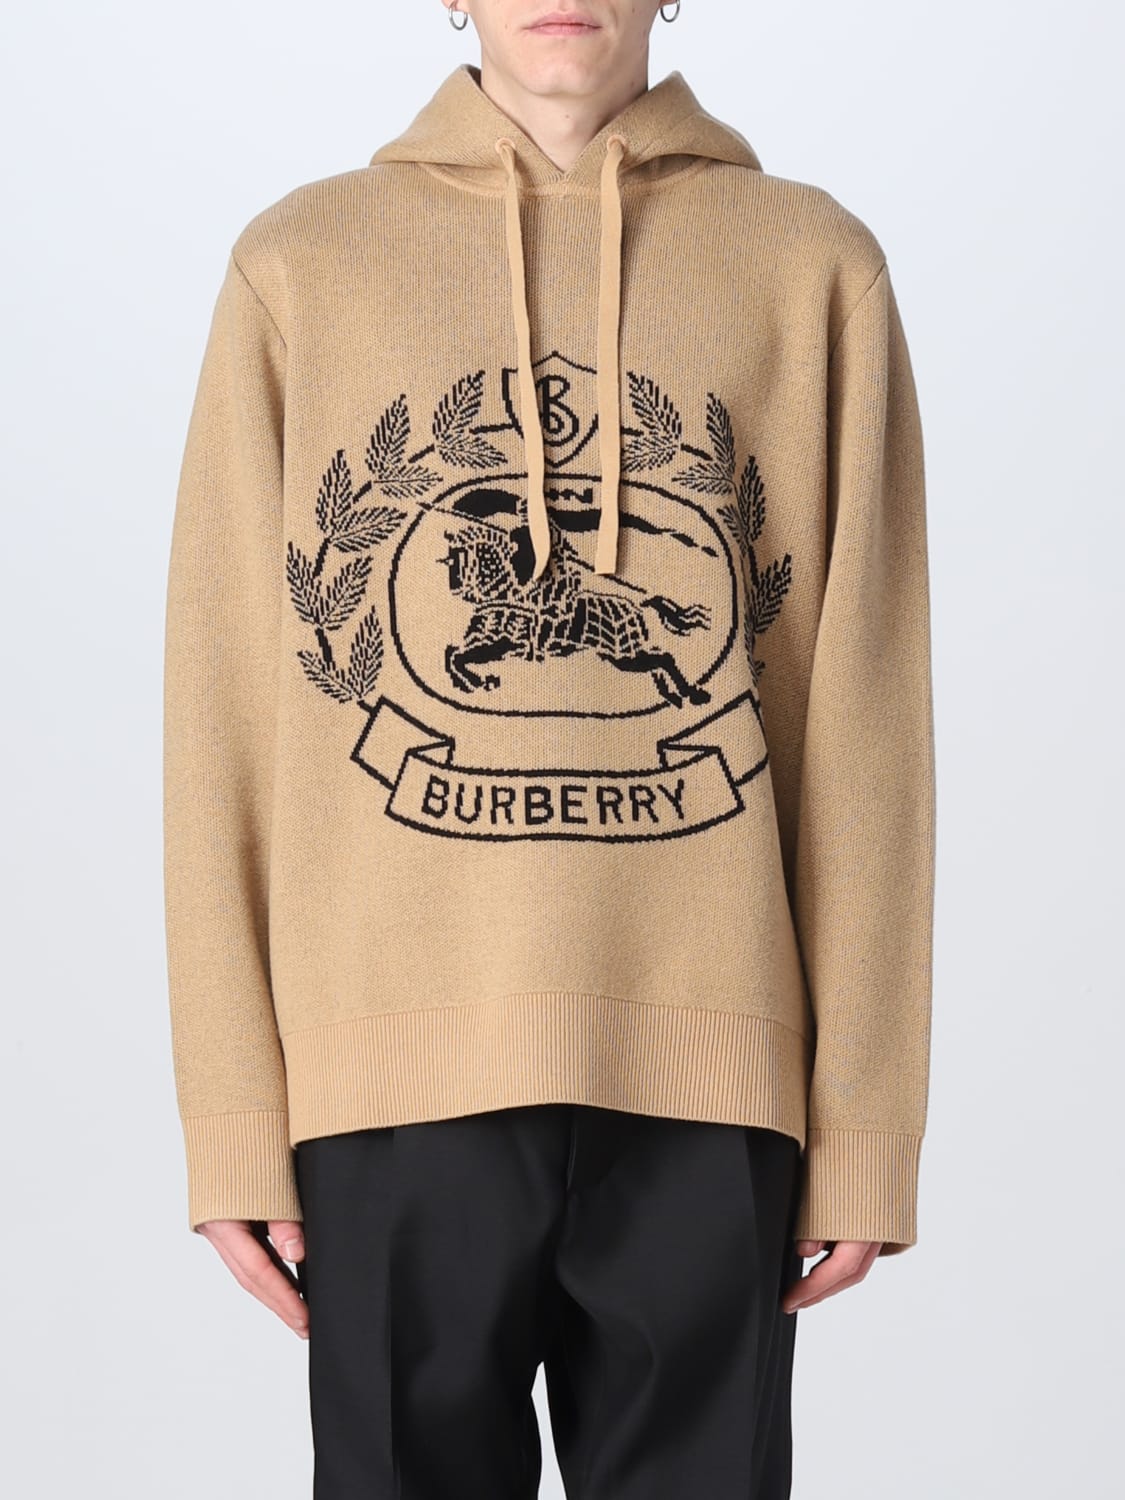 Sociologi Syge person gøre ondt BURBERRY: sweatshirt in jacquard wool - Camel | Burberry sweatshirt 8064129  online on GIGLIO.COM